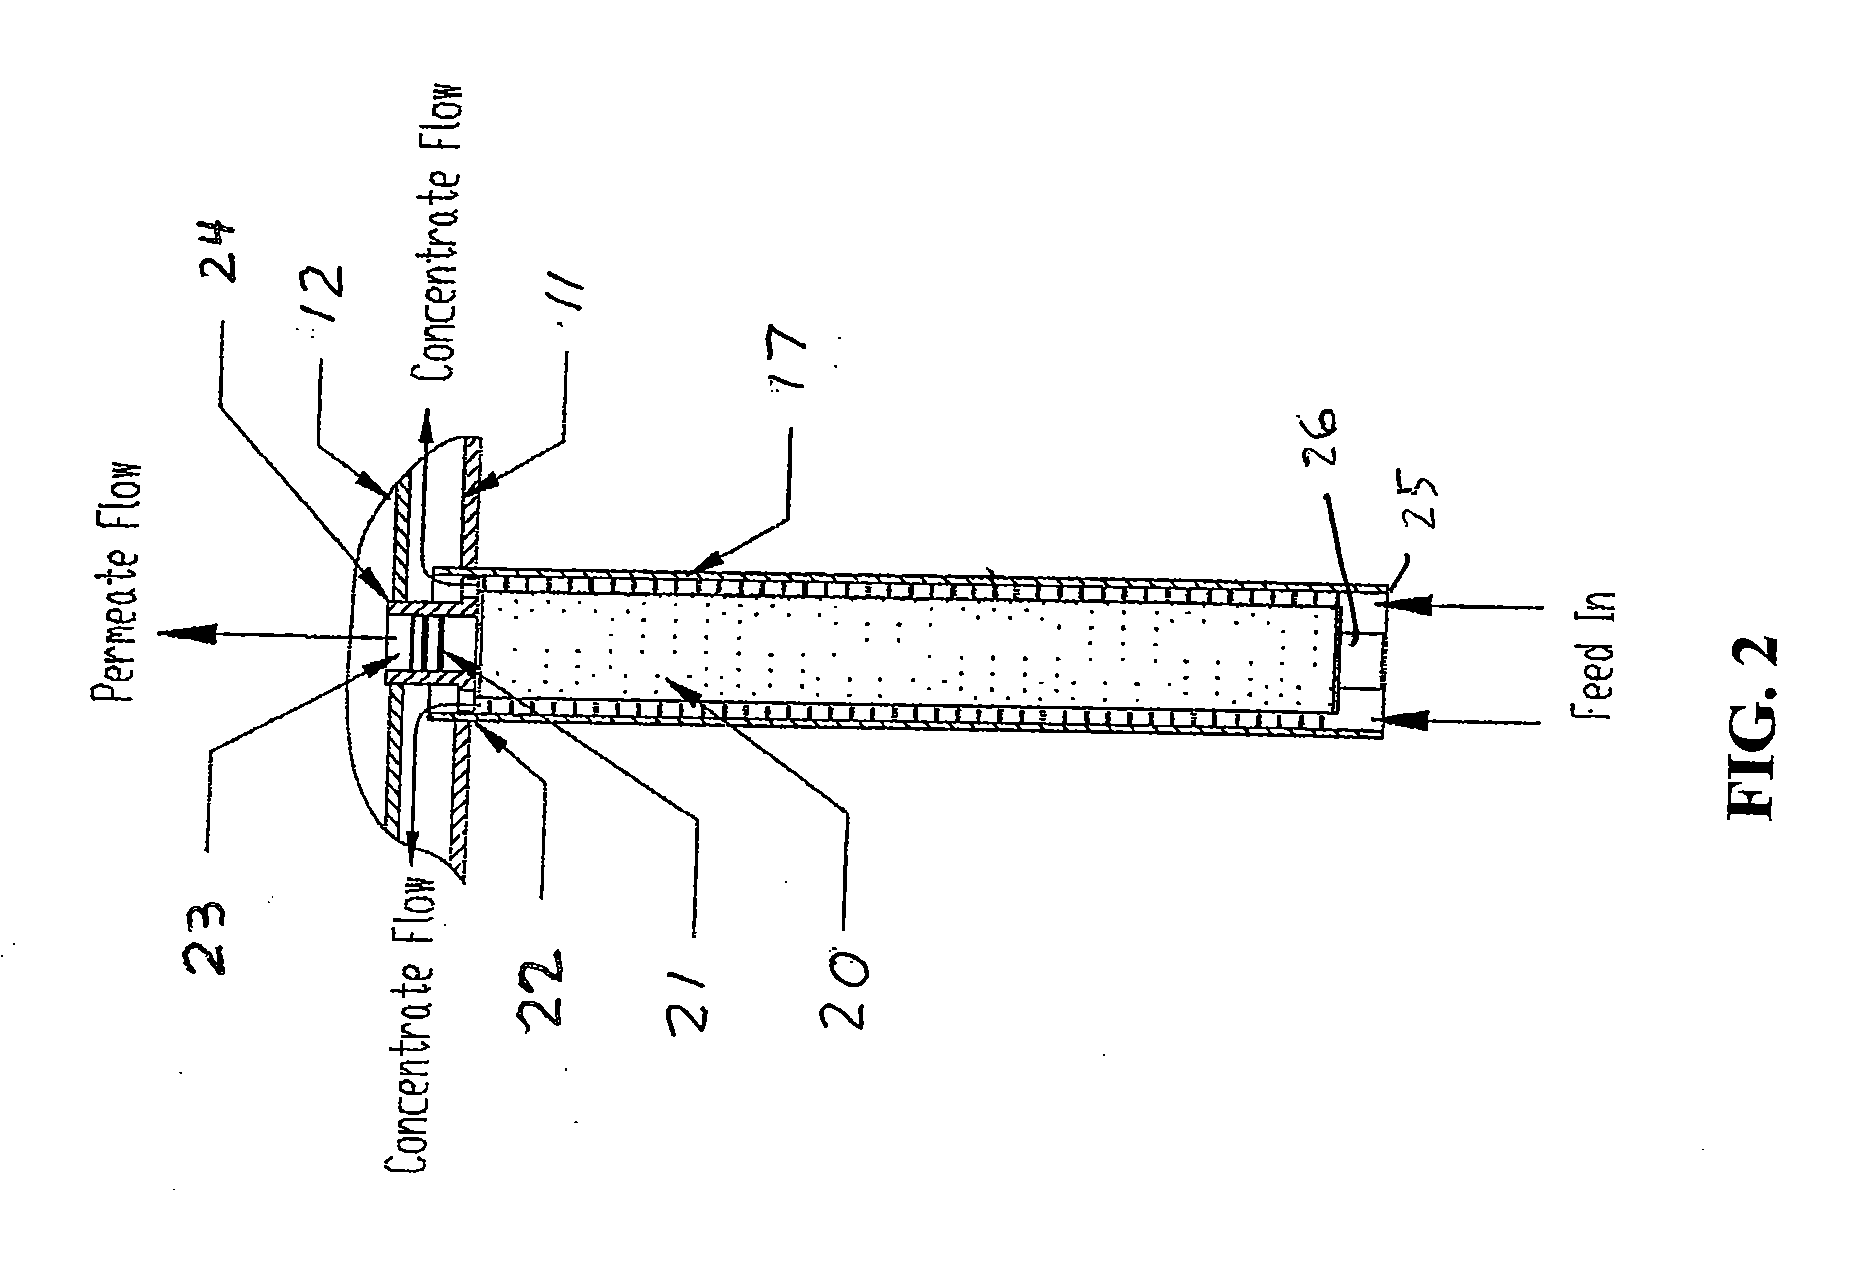 System and Method of Fluid Filtration Utilizing Cross-Flow Currents